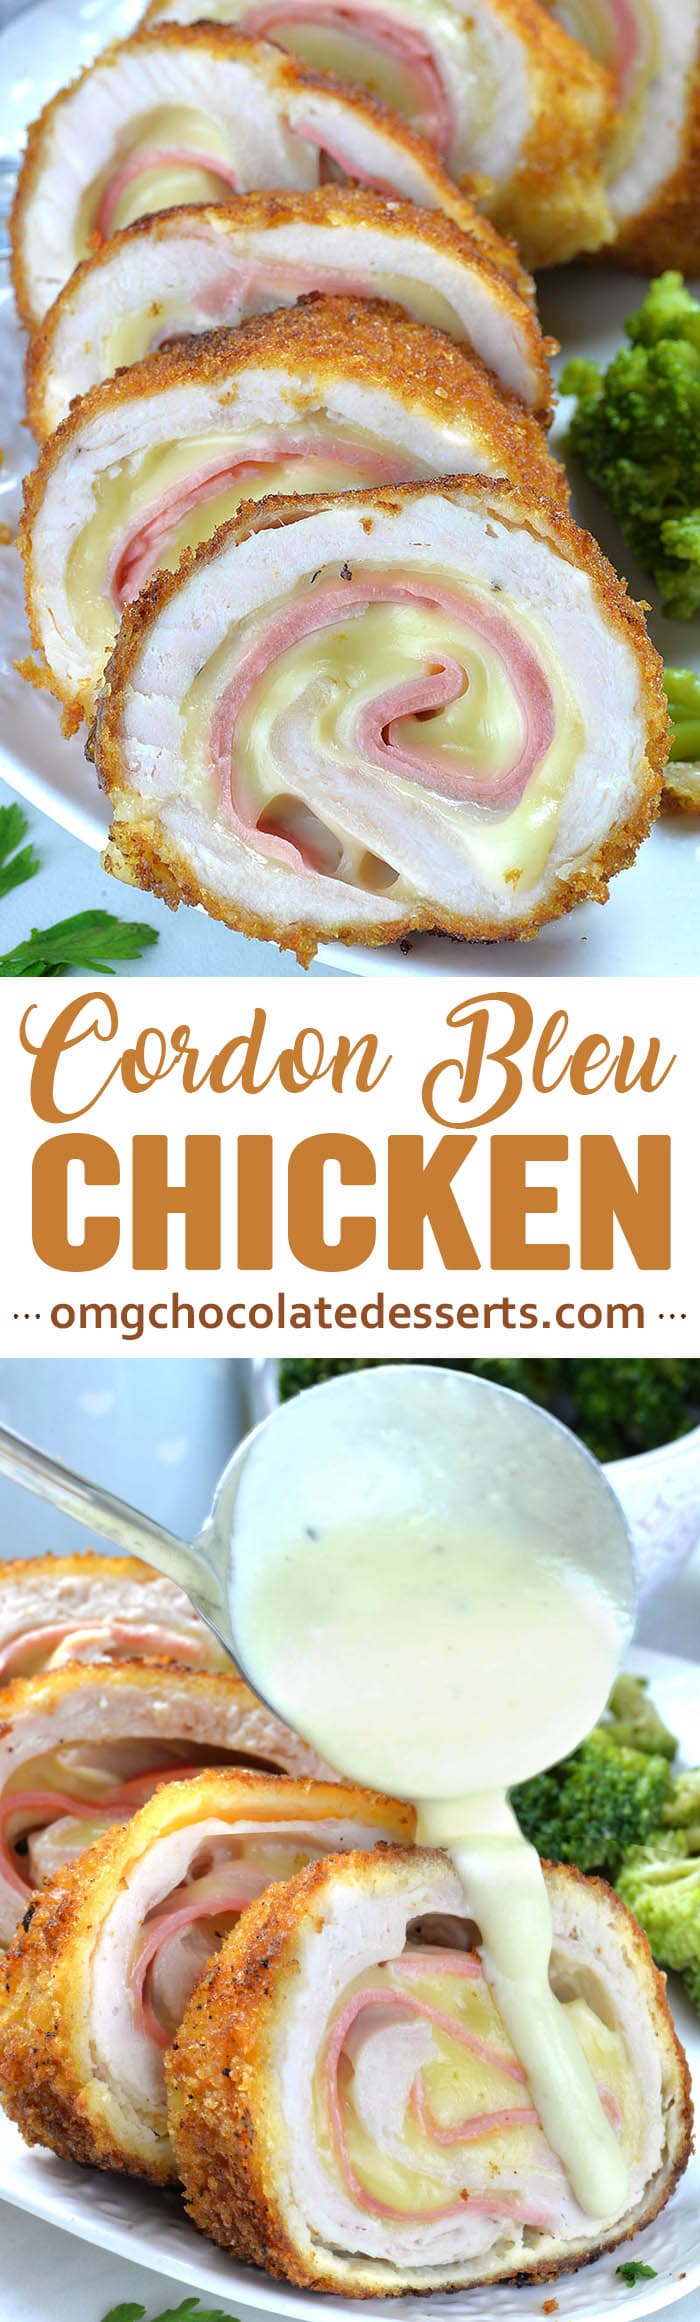 Translated as a “blue ribbon”, term CORDON BLEU refers to food prepared by eminent cooks and to a very high standard. But with this easy Chicken Cordon Bleu recipe you can make delicious family dinner like a chef!